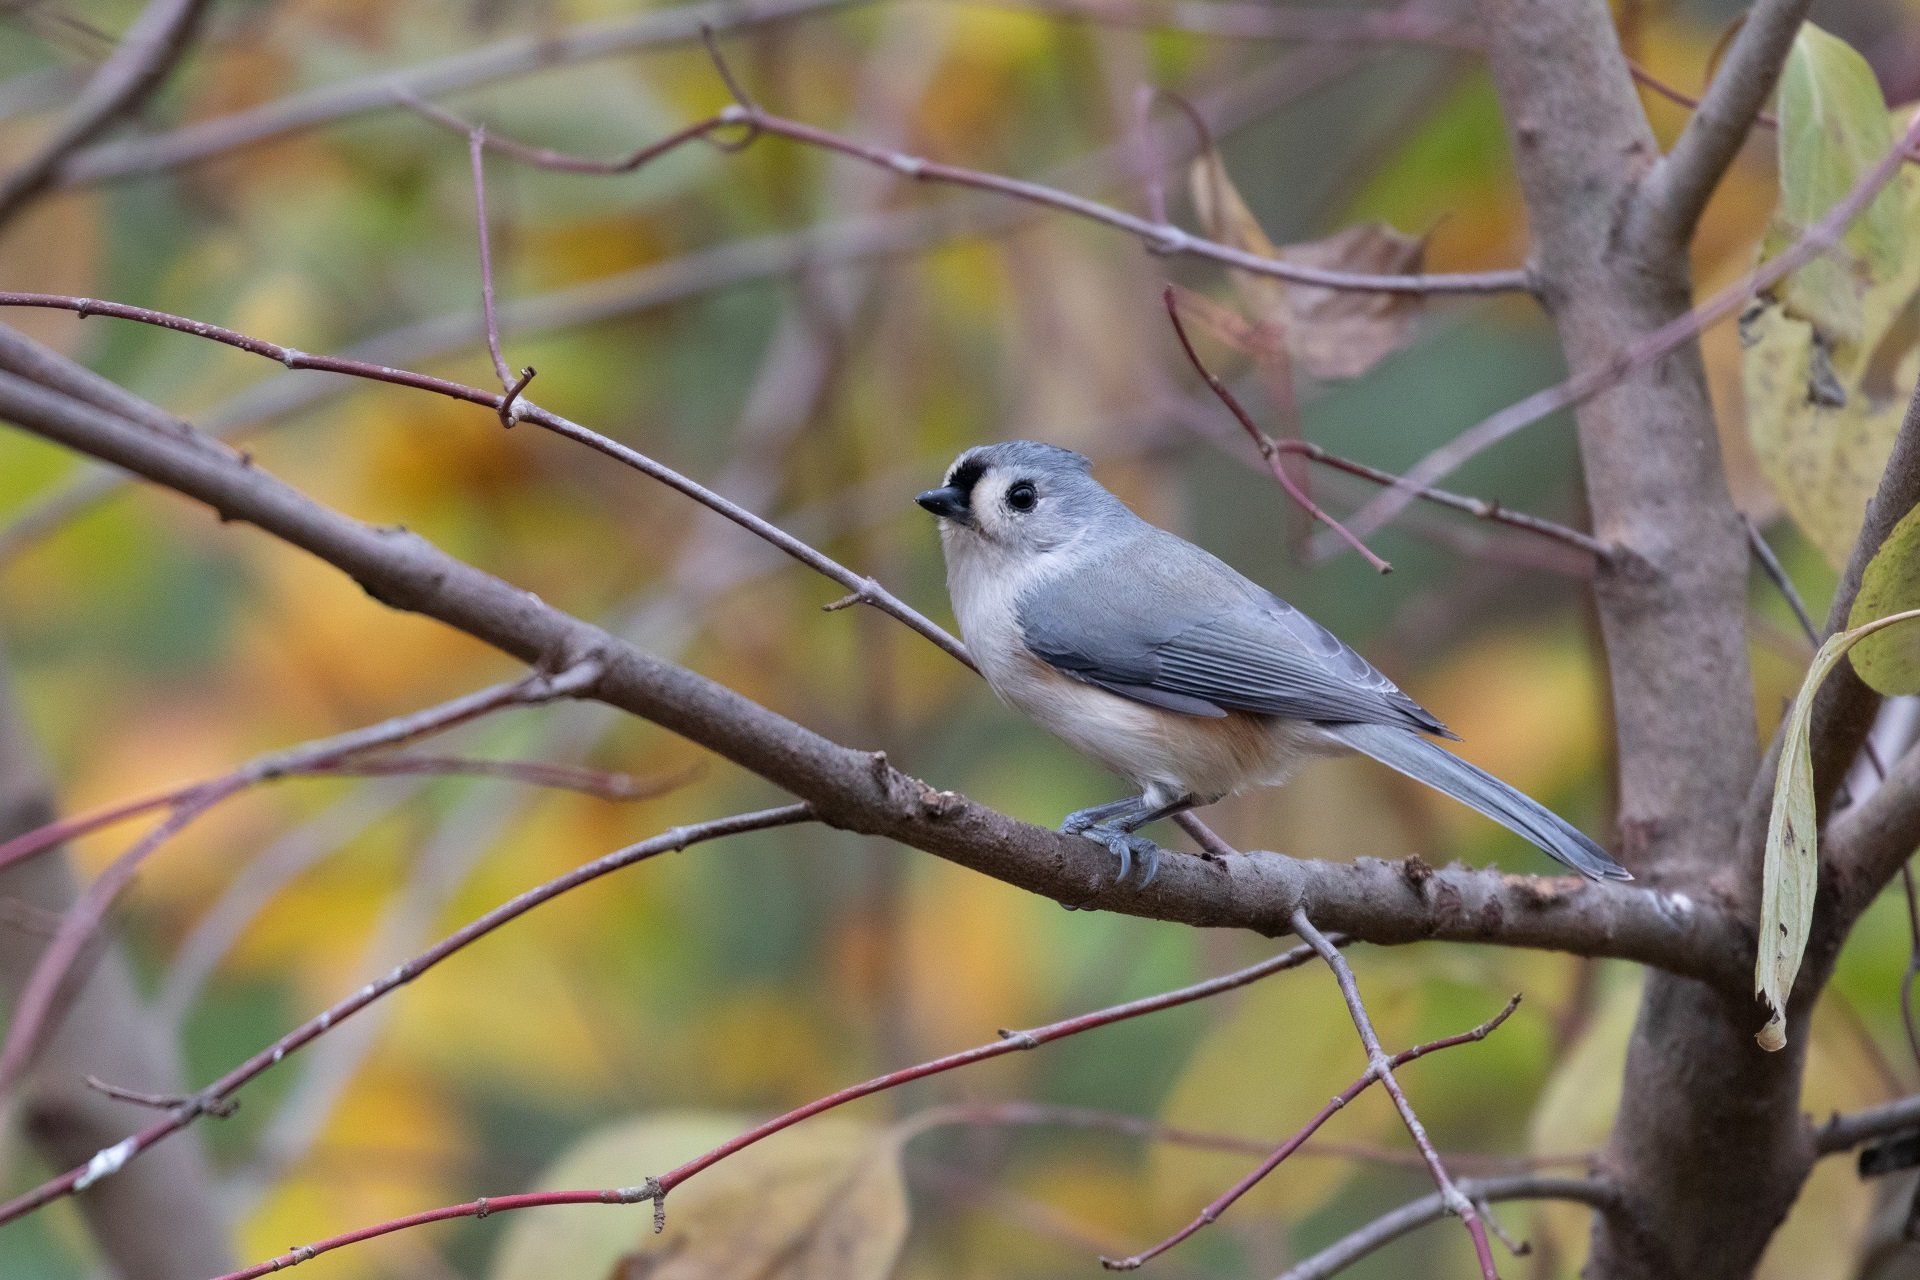 A Tufted Titmouse perches on a bare branch.